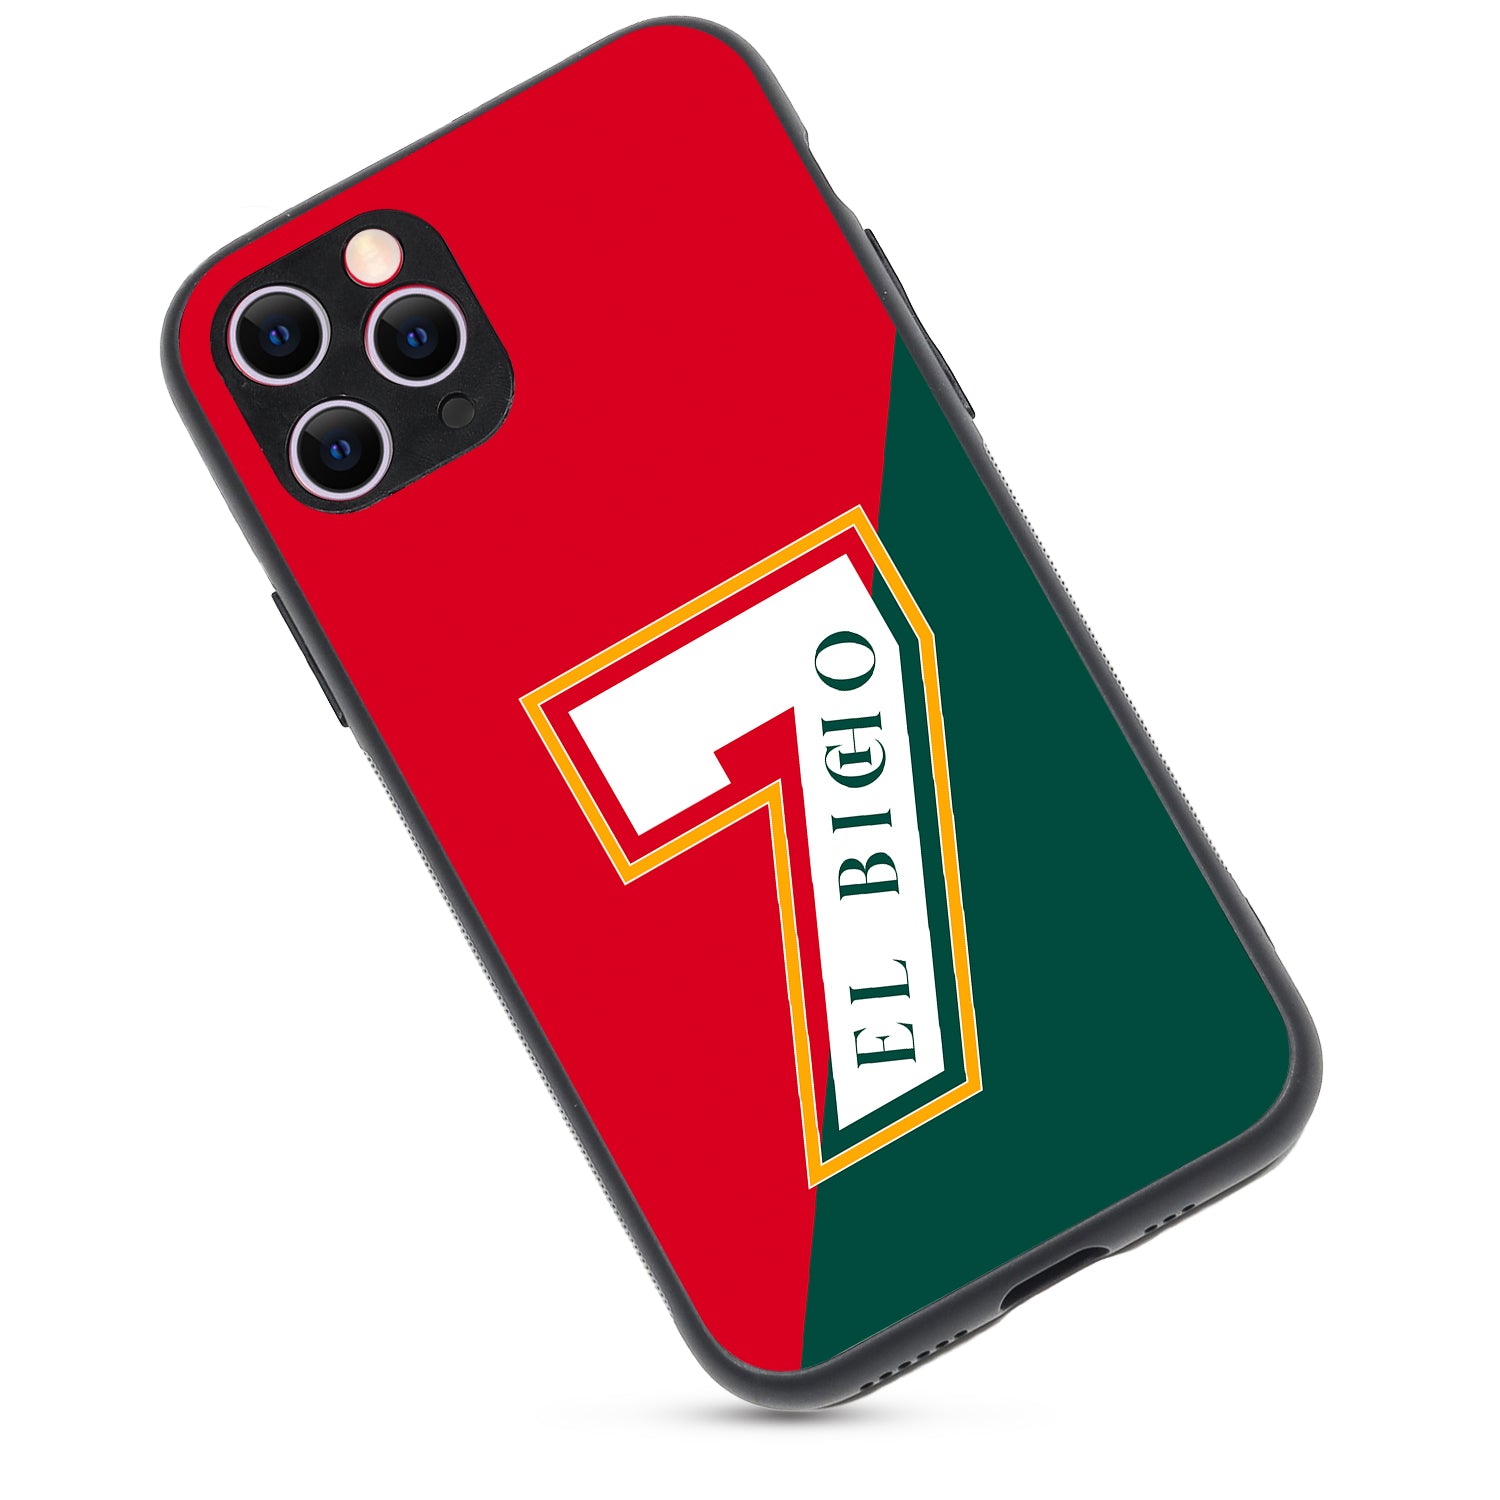 Jersey 7 Sports iPhone 11 Pro Case